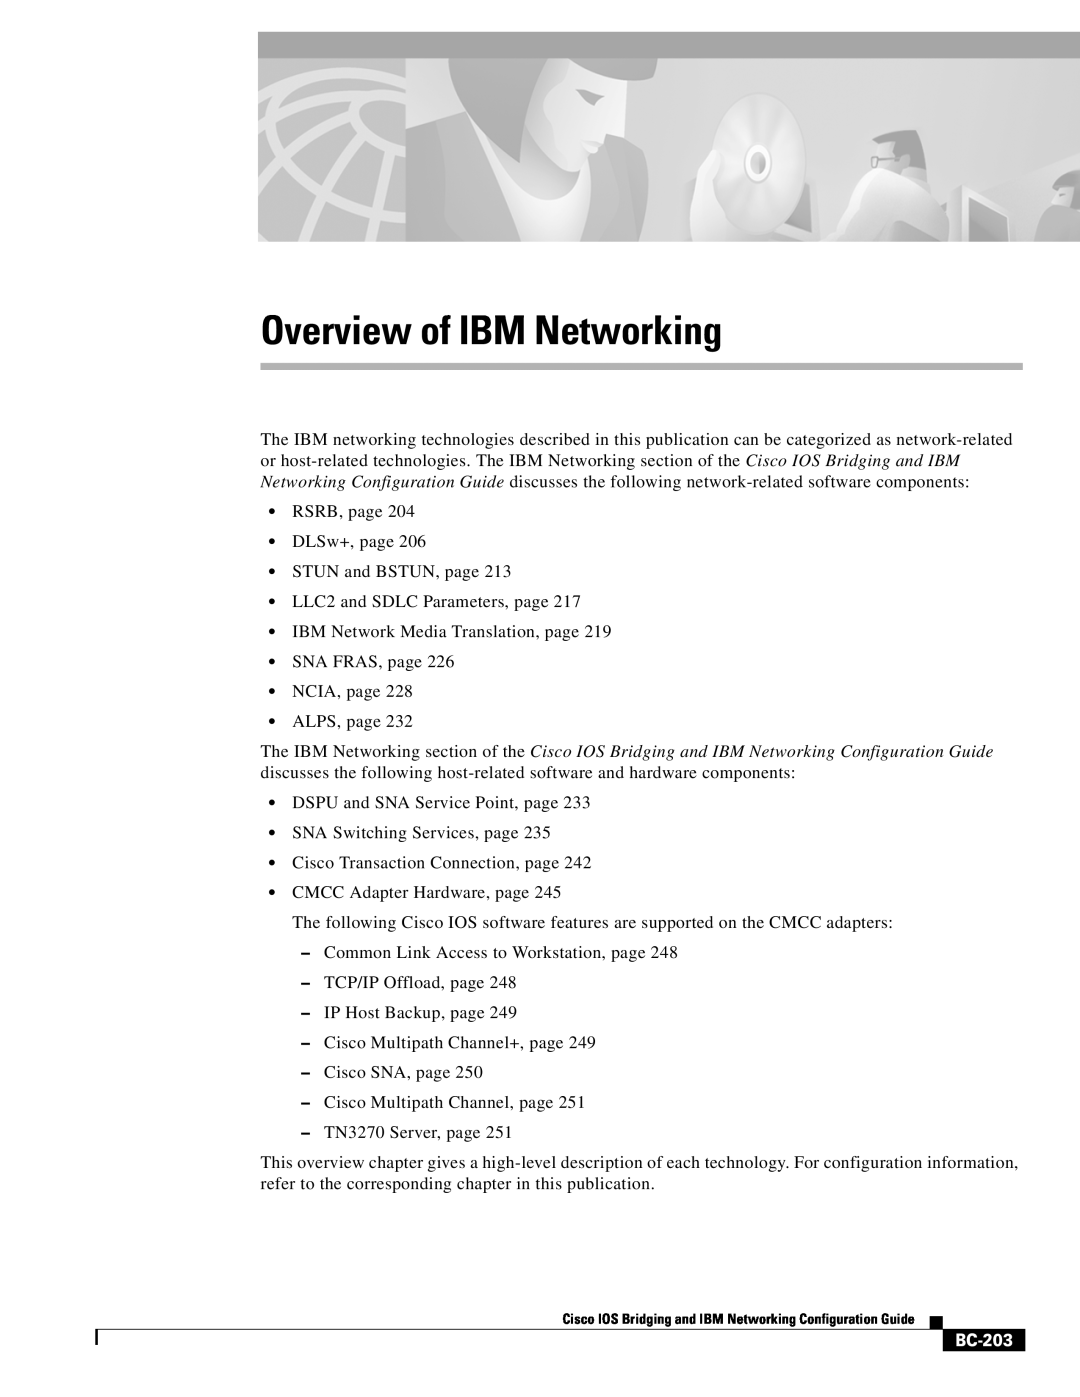 IBM BC-203 manual Overview of IBM Networking 